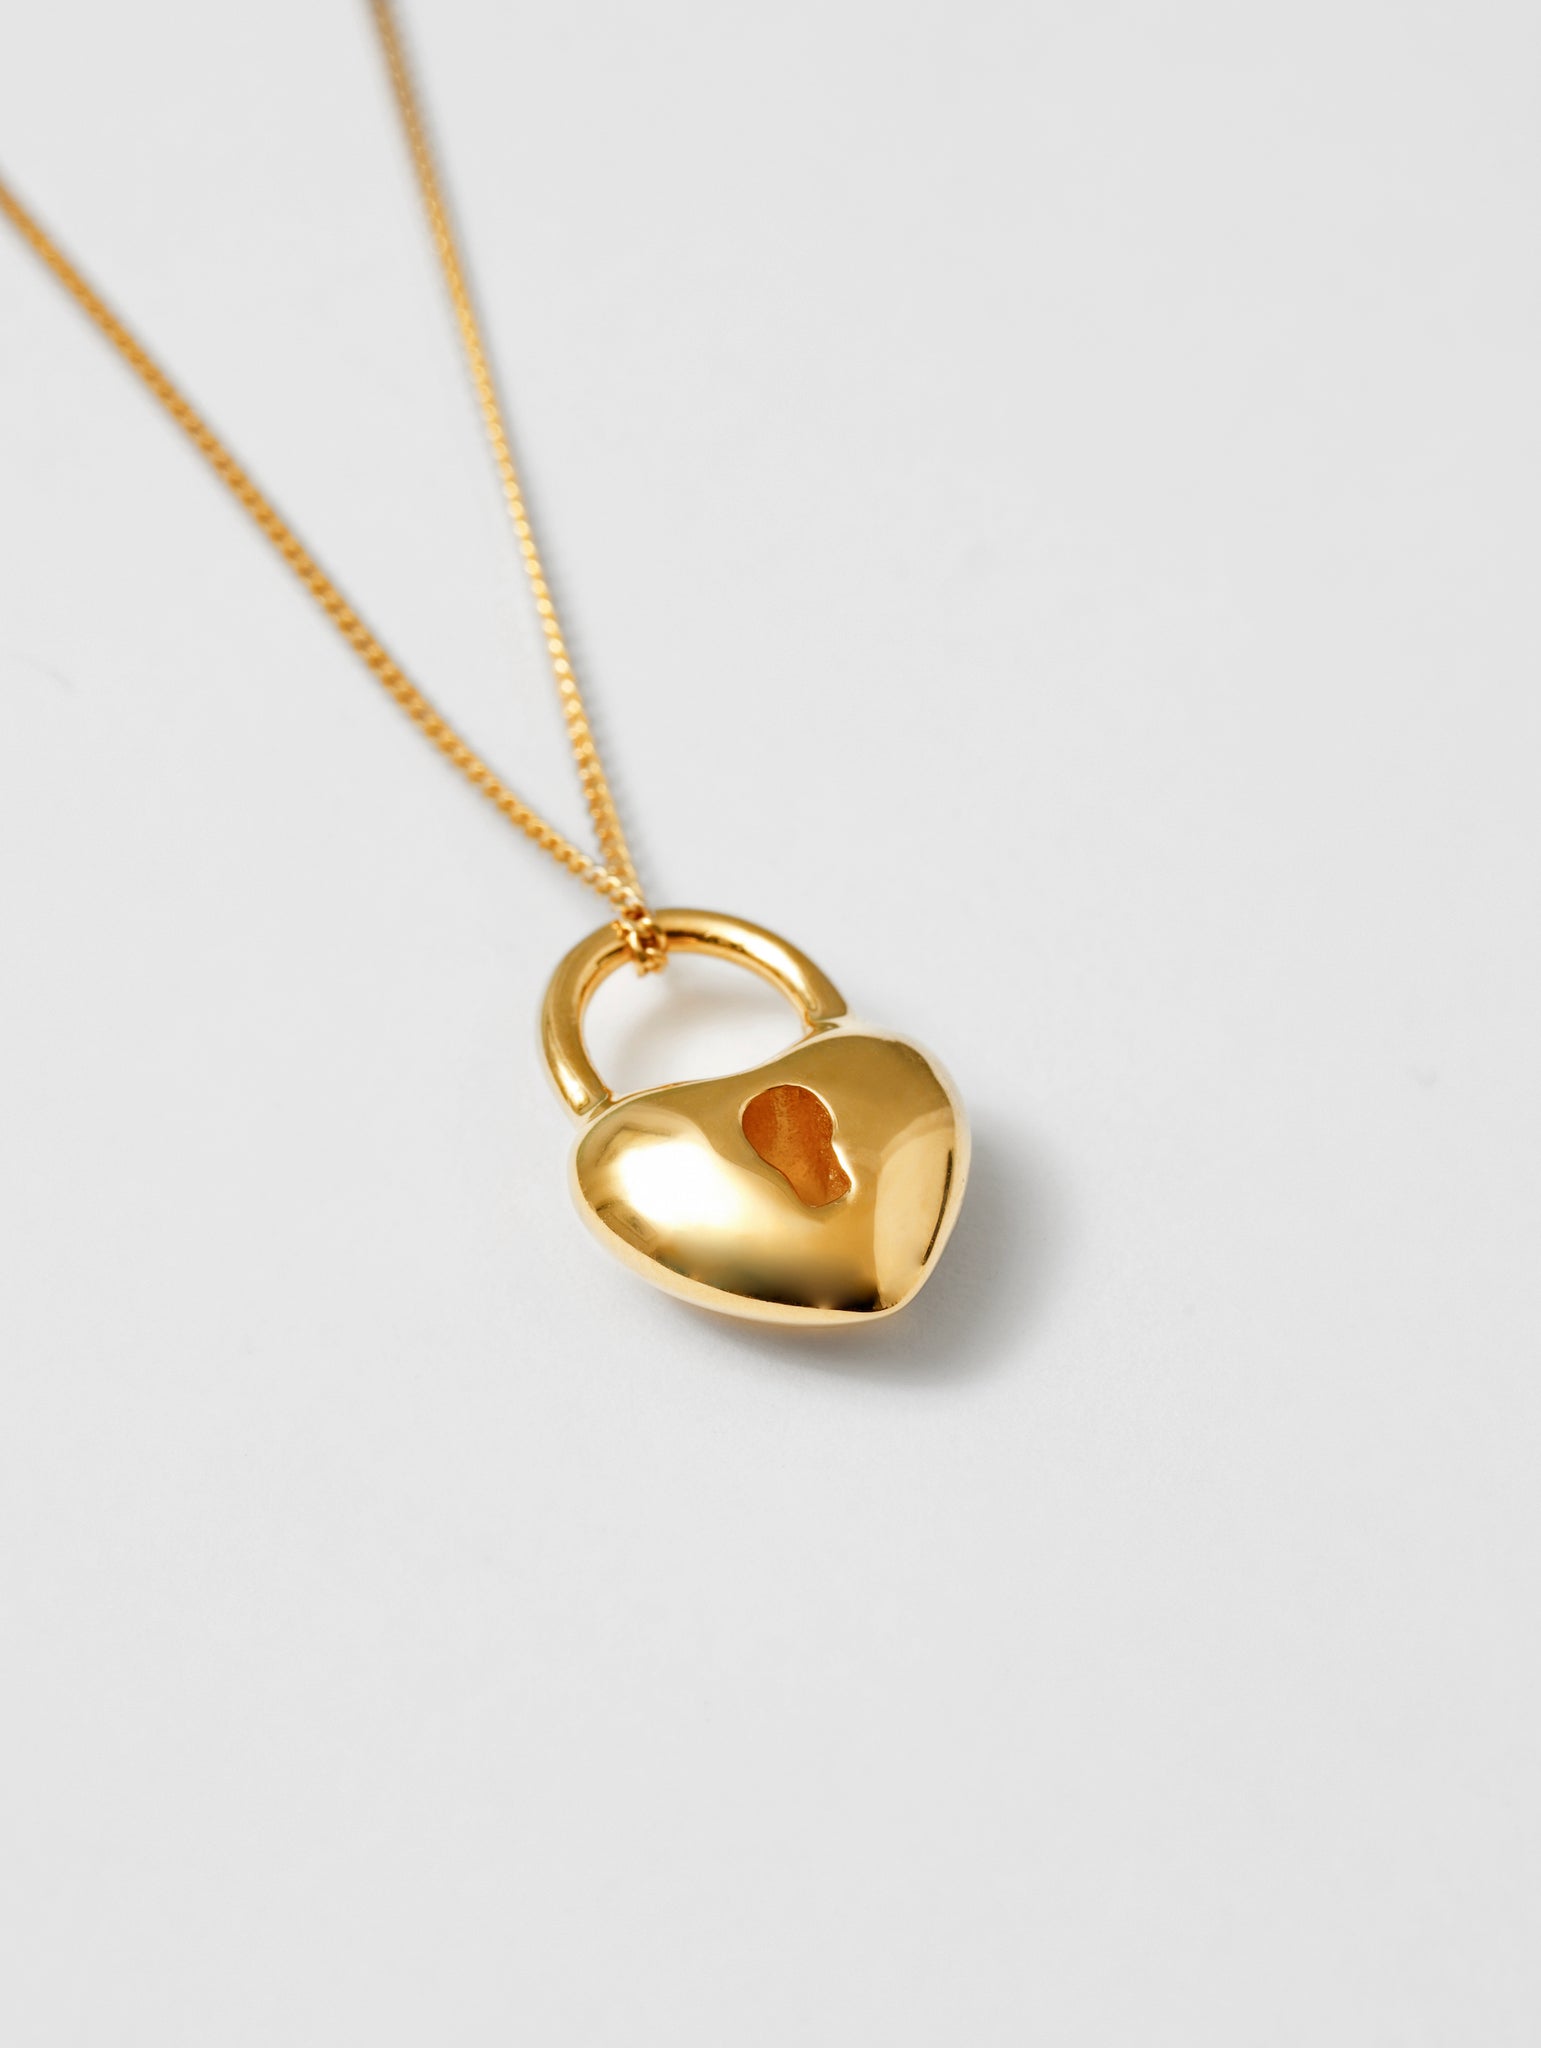 Wolf Circus Heart Locket Necklace 14k Gold Plated | Recycled Materials | Heart Locket Necklace in Gold-Necklaces-wolfcircus.com